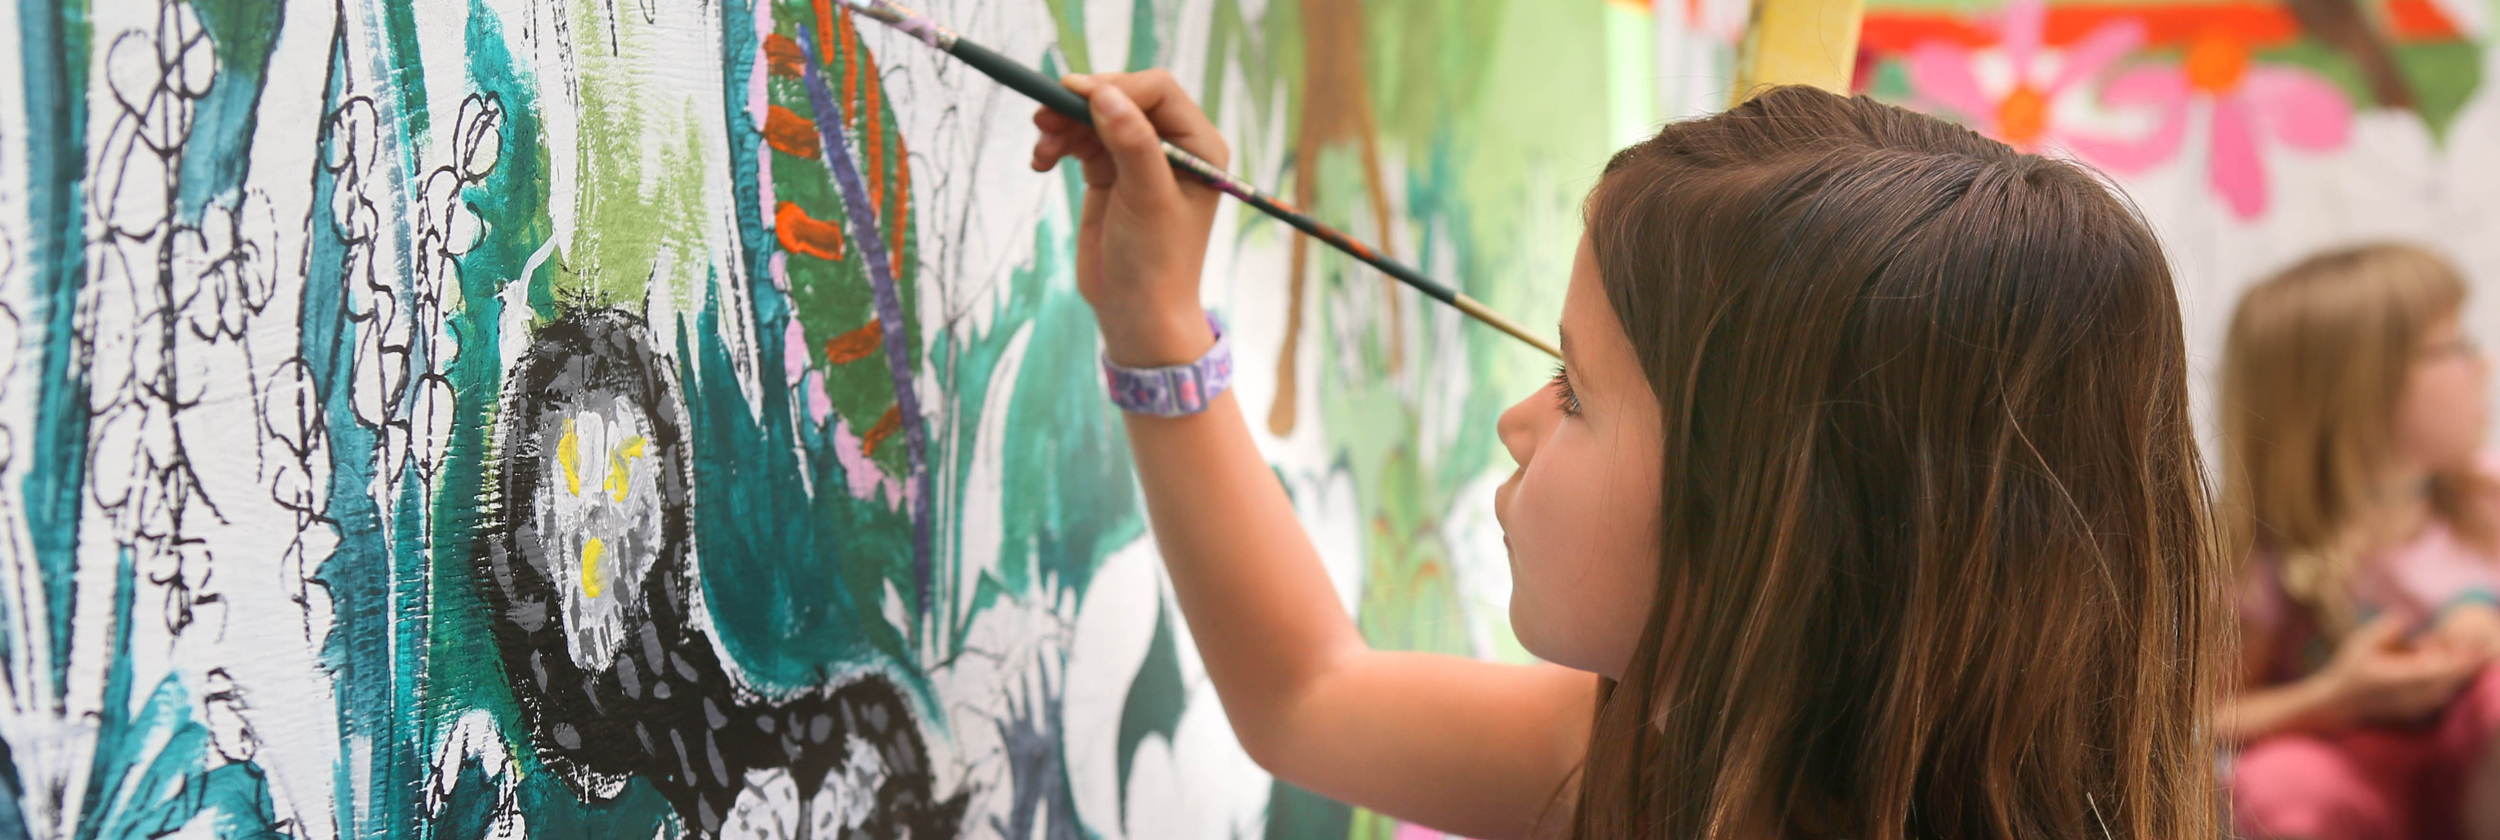 Elementary student painting mural